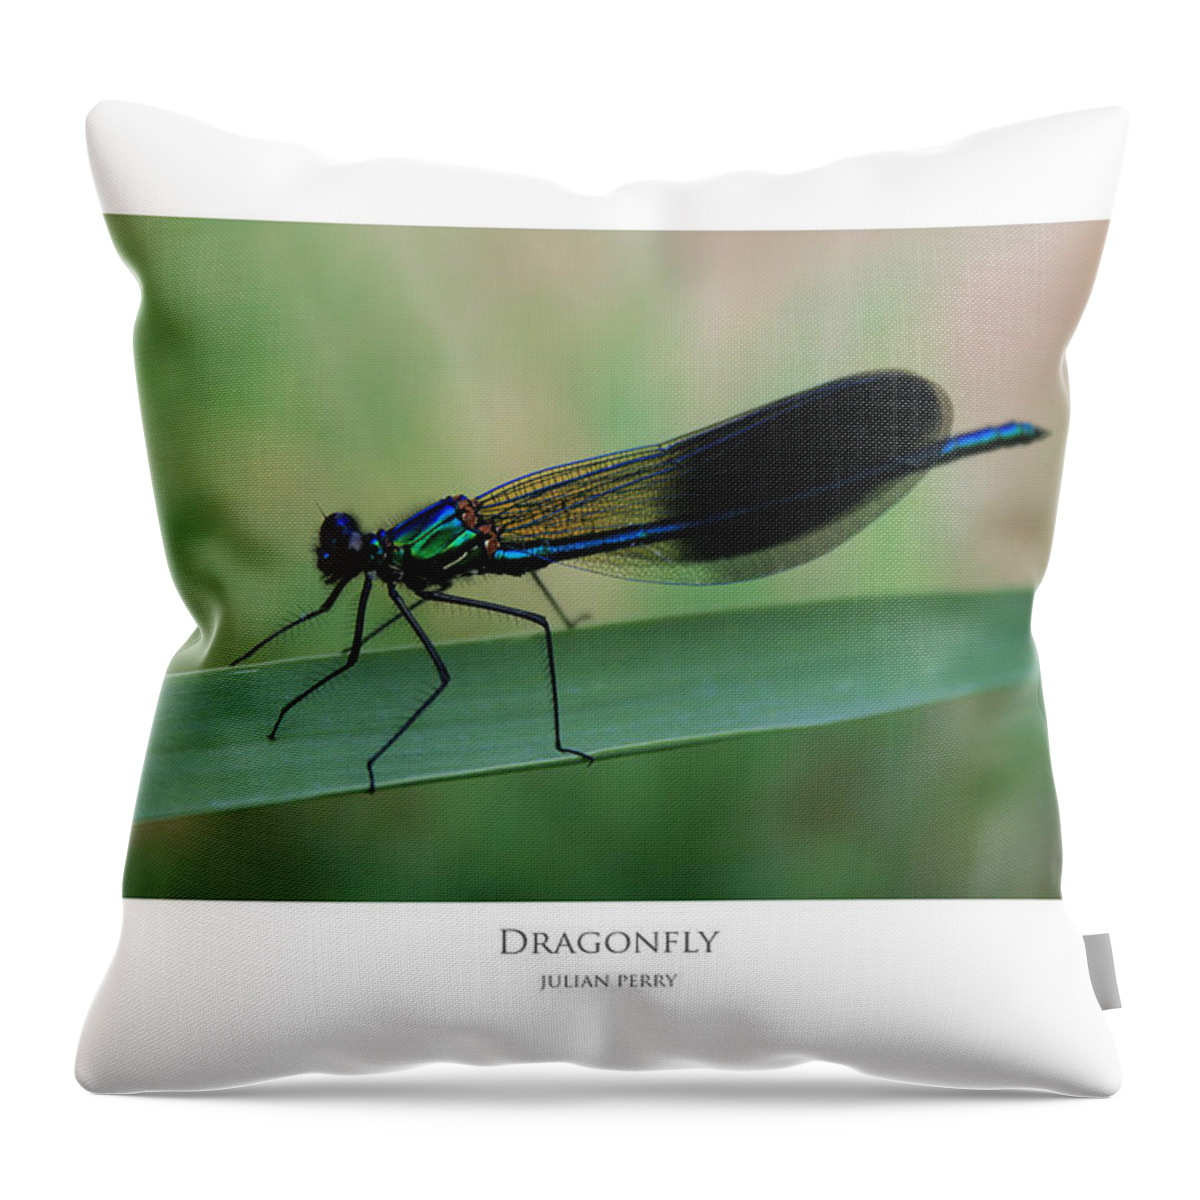 Dragonfly Throw Pillow featuring the digital art Dragonfly by Julian Perry